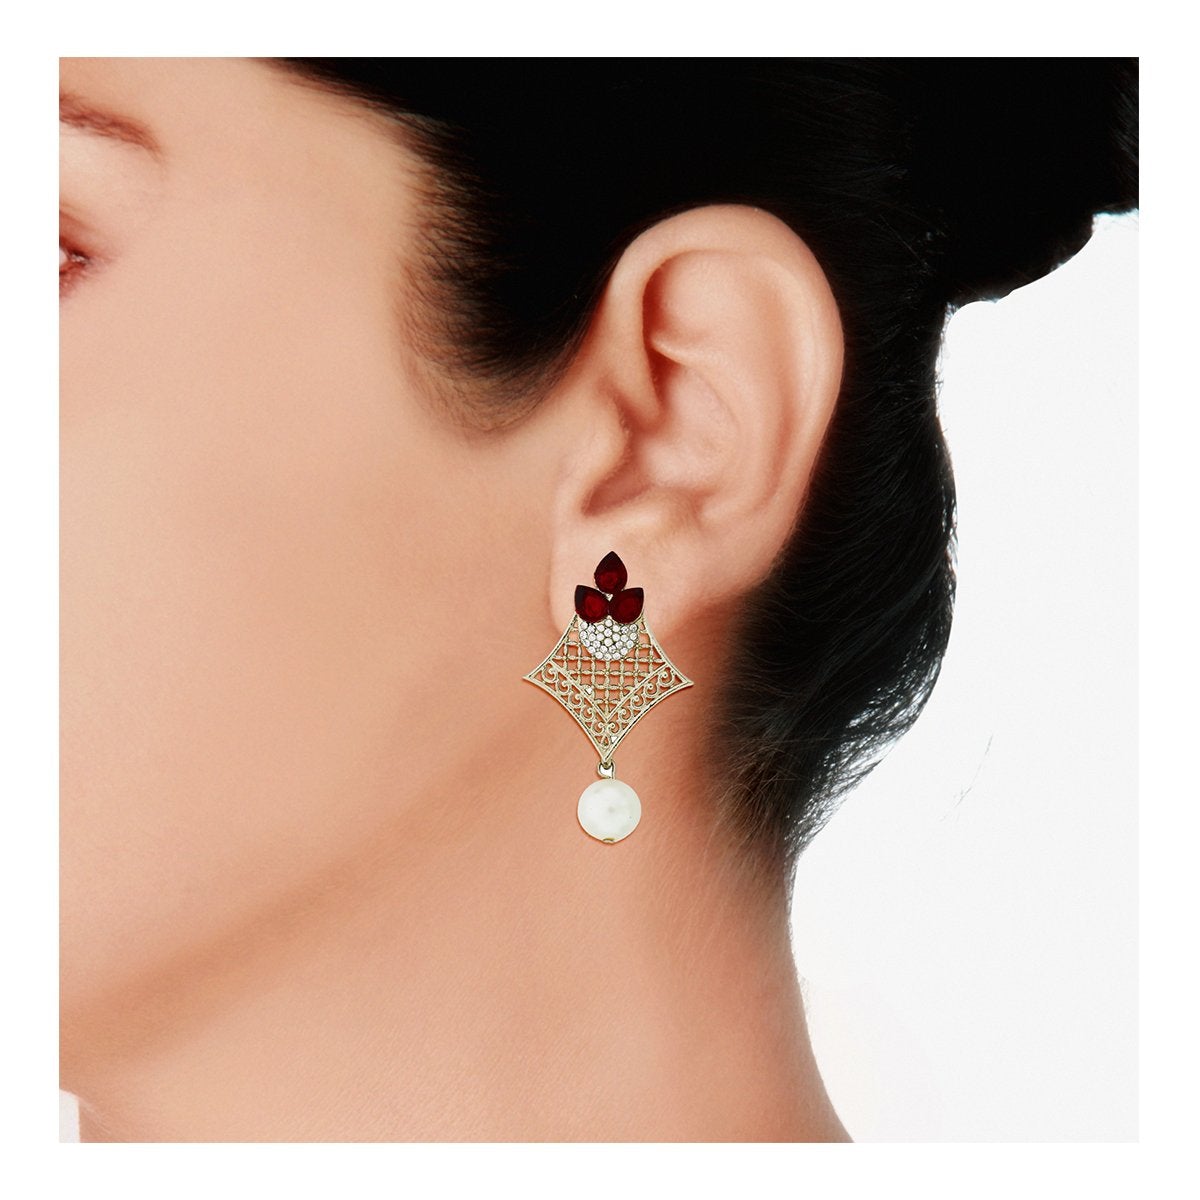 Pear Flower Filigree Antique Rhodium Pearl Red Earring For Women